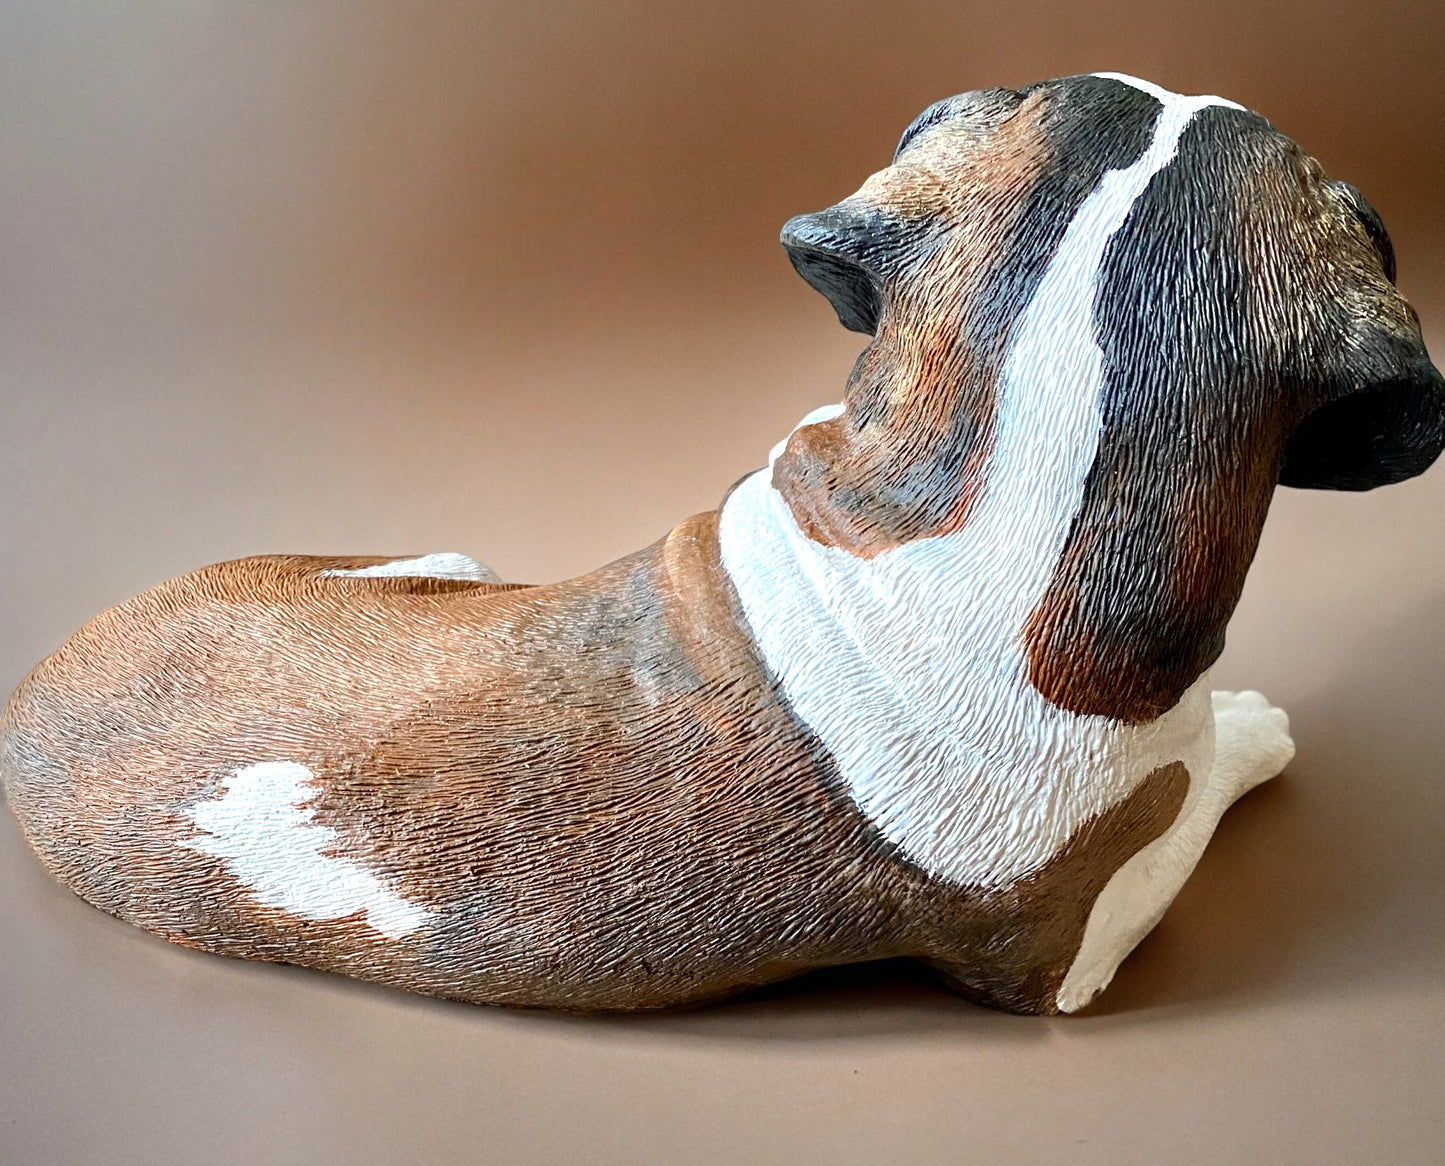 Saint Bernard statue made of concrete commissioned pet portrait of Charlie. Dog statue is laying down. Back view of statue.